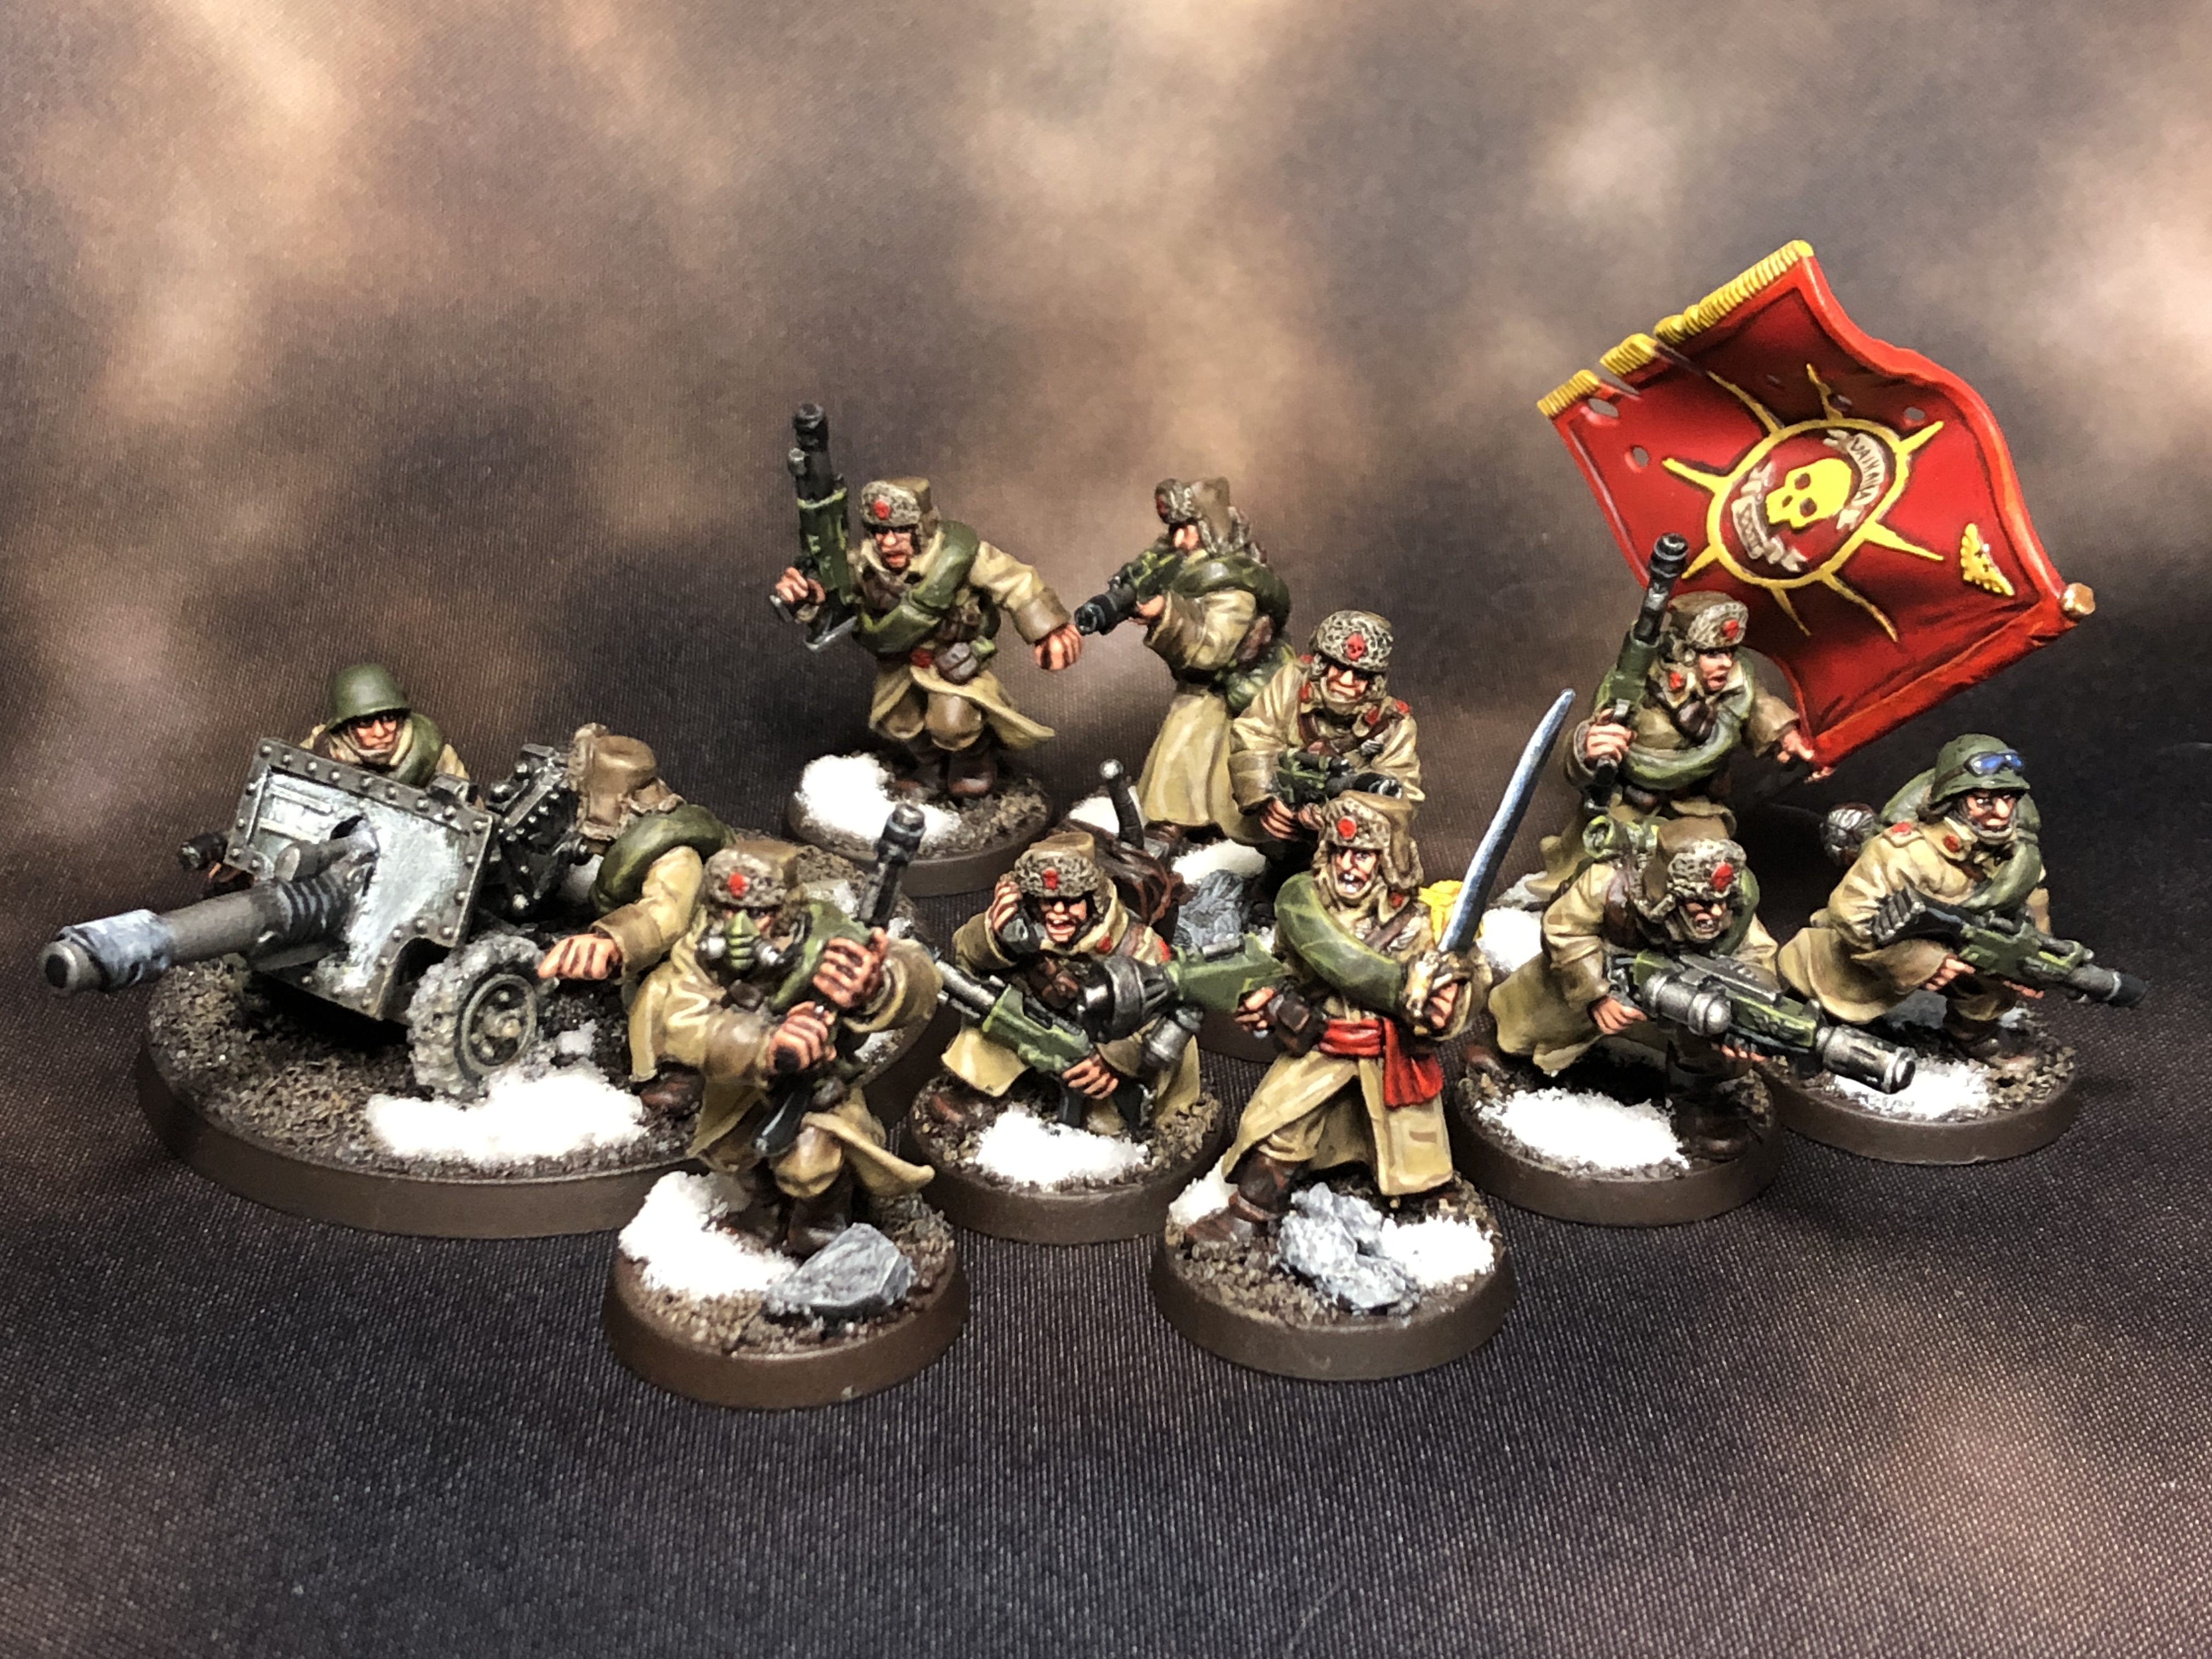 Painted Multi-Listing Astra Militarum Imperial Guard CATACHAN SCOUT SENTINELS